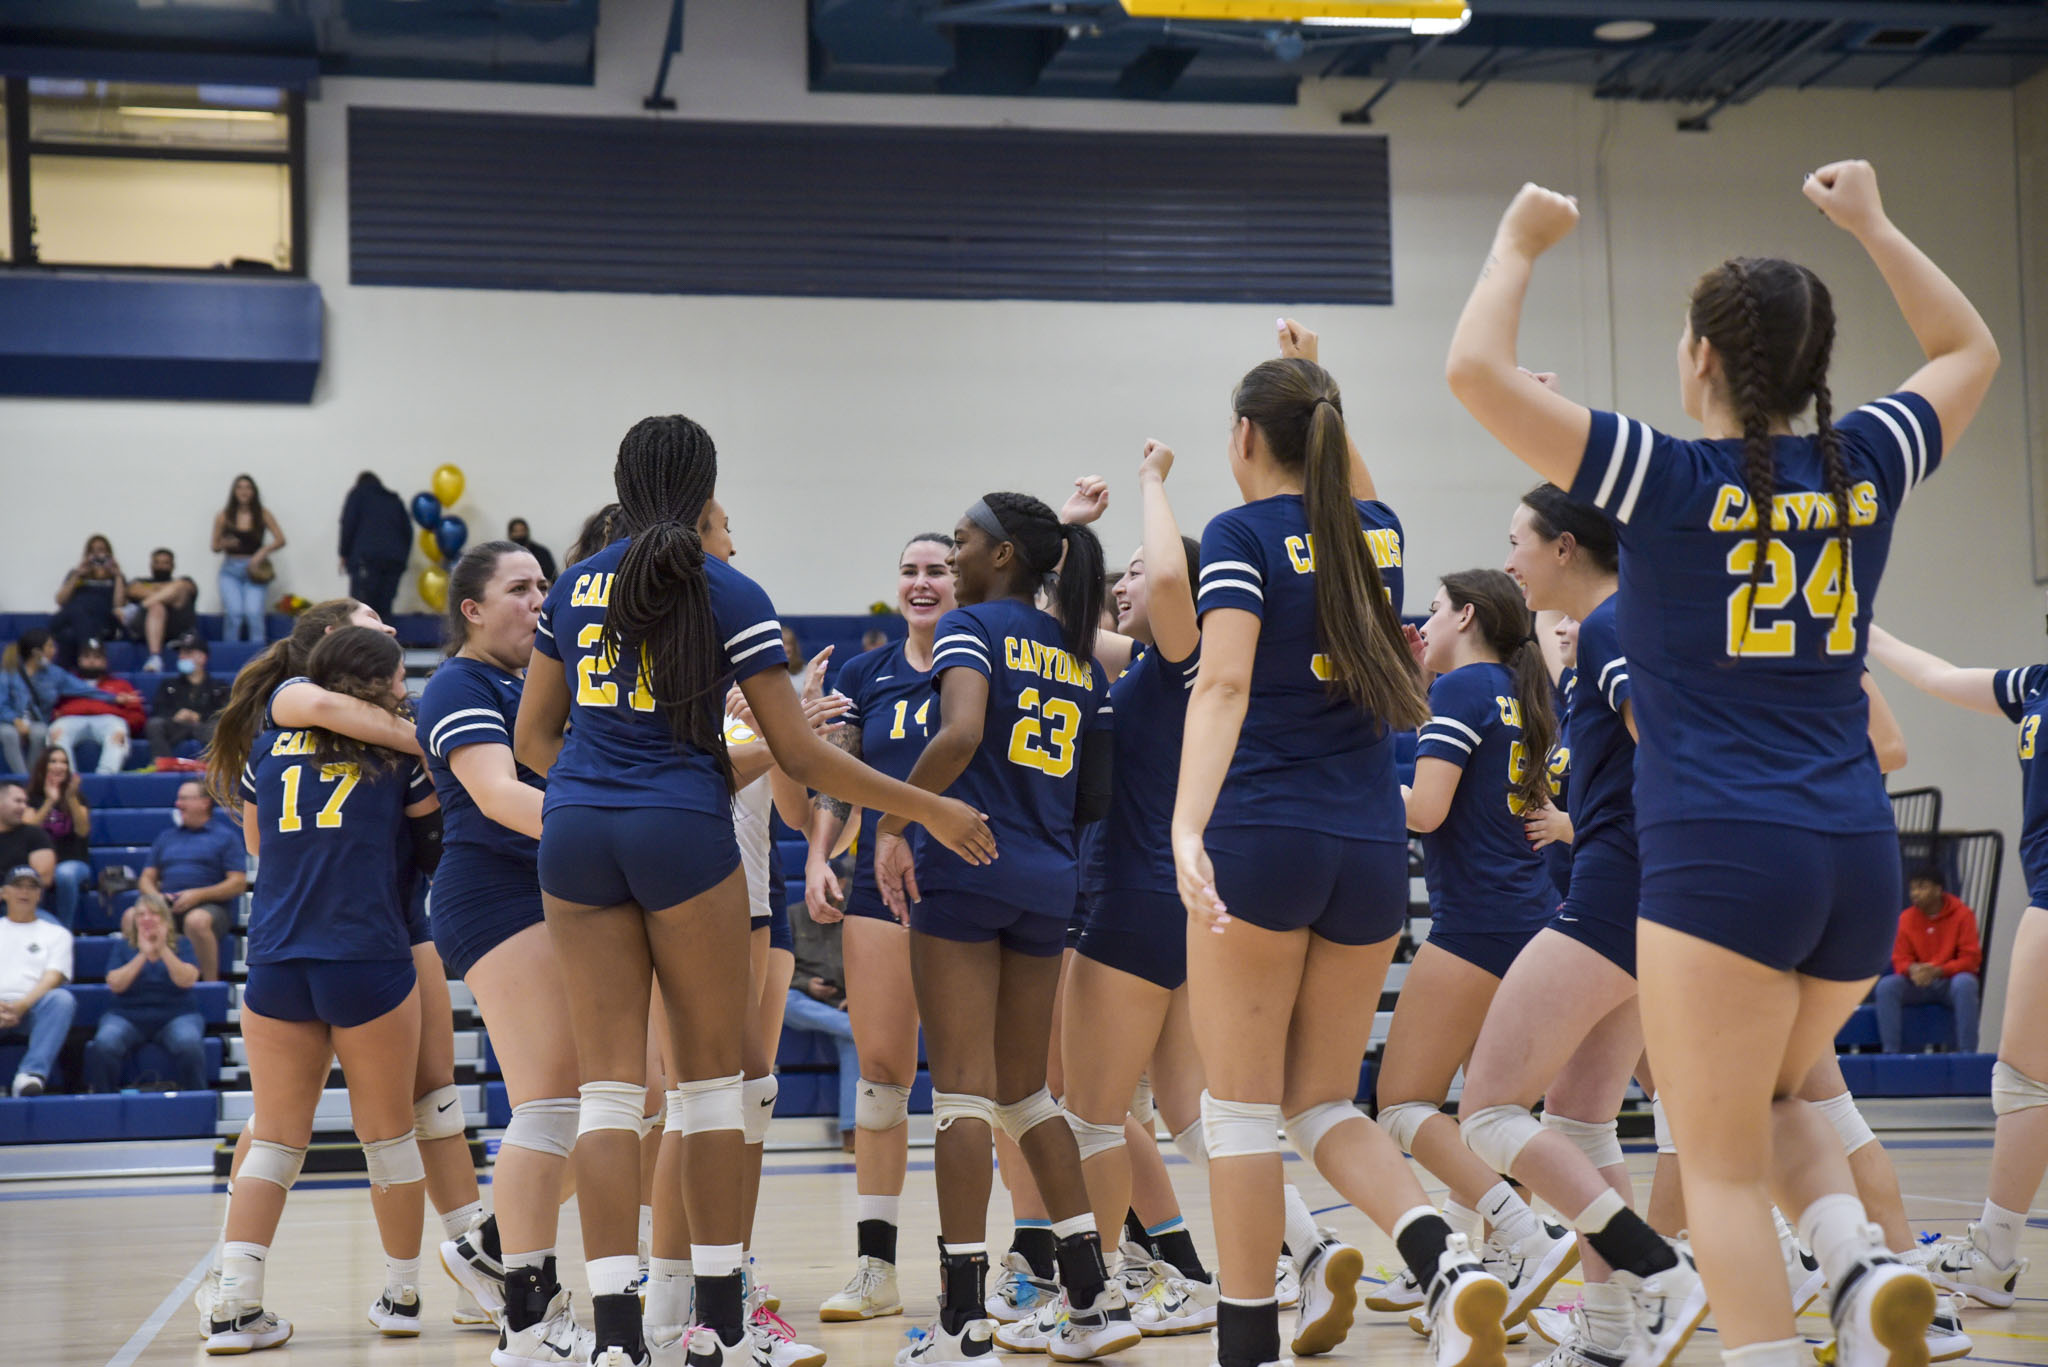 College of the Canyons is headed to the postseason for an eighth straight season after finishing second in the Western State Conference, South Division. No. 15 seed Canyons will now host No. 18 Mt. San Jacinto in a CCCAA Southern California Regional Play-In game at 7 p.m. Saturday, Nov. 20, in the Cougar Cage. — Mari Kneisel/COC Sports Information.